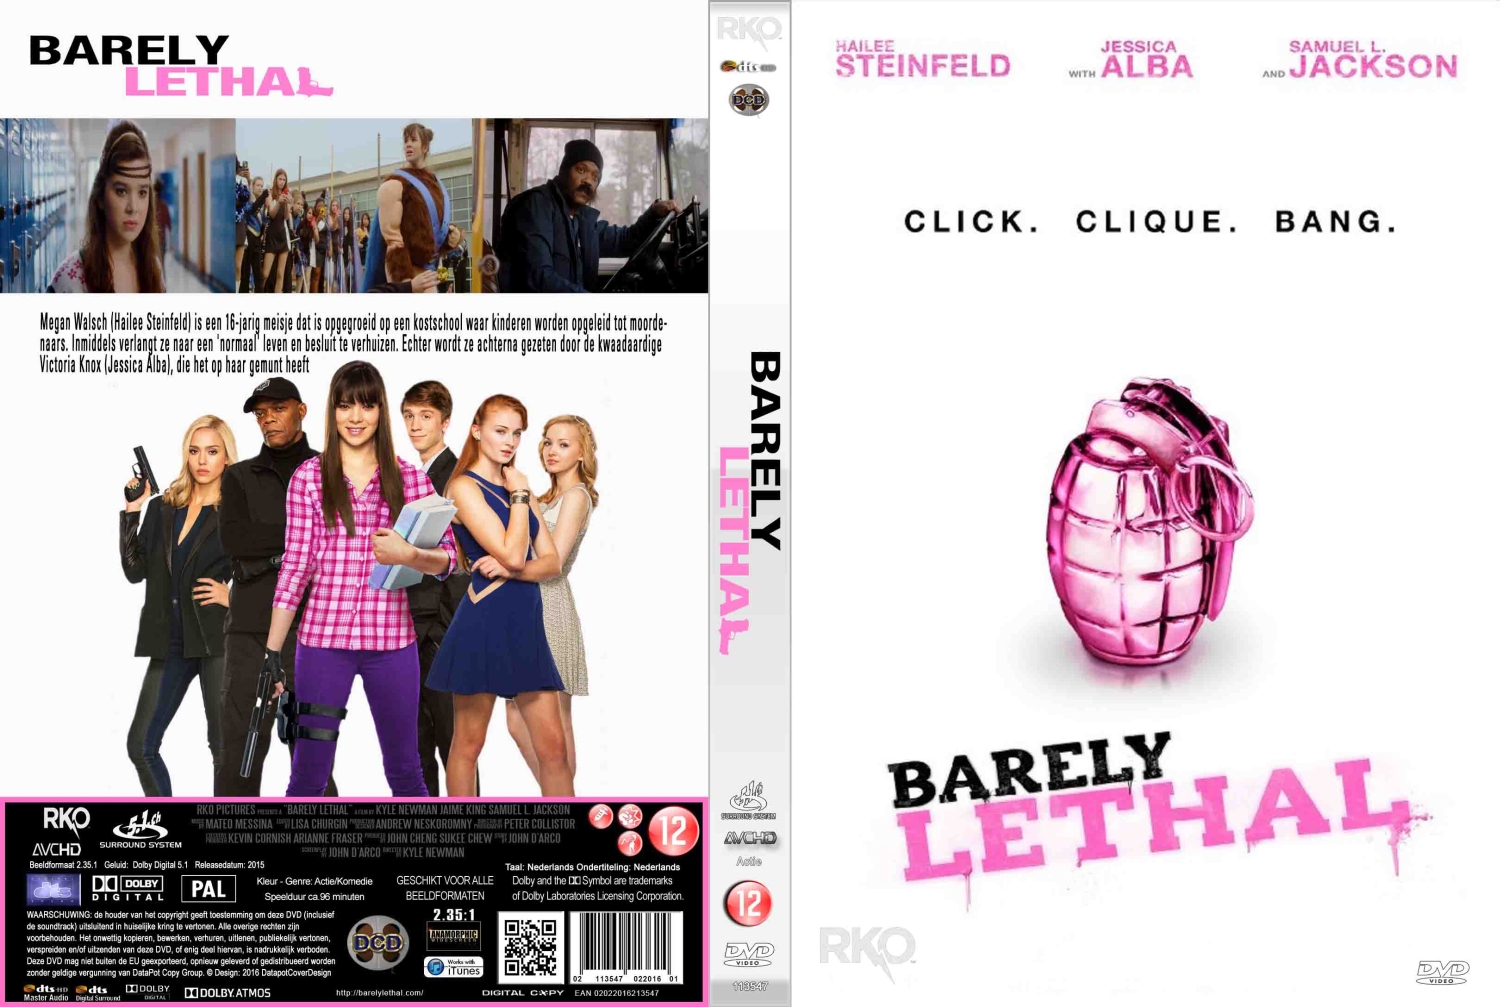 Barely Lethal 2015 Dvd Cover Dvd Covers Cover Century Over 1